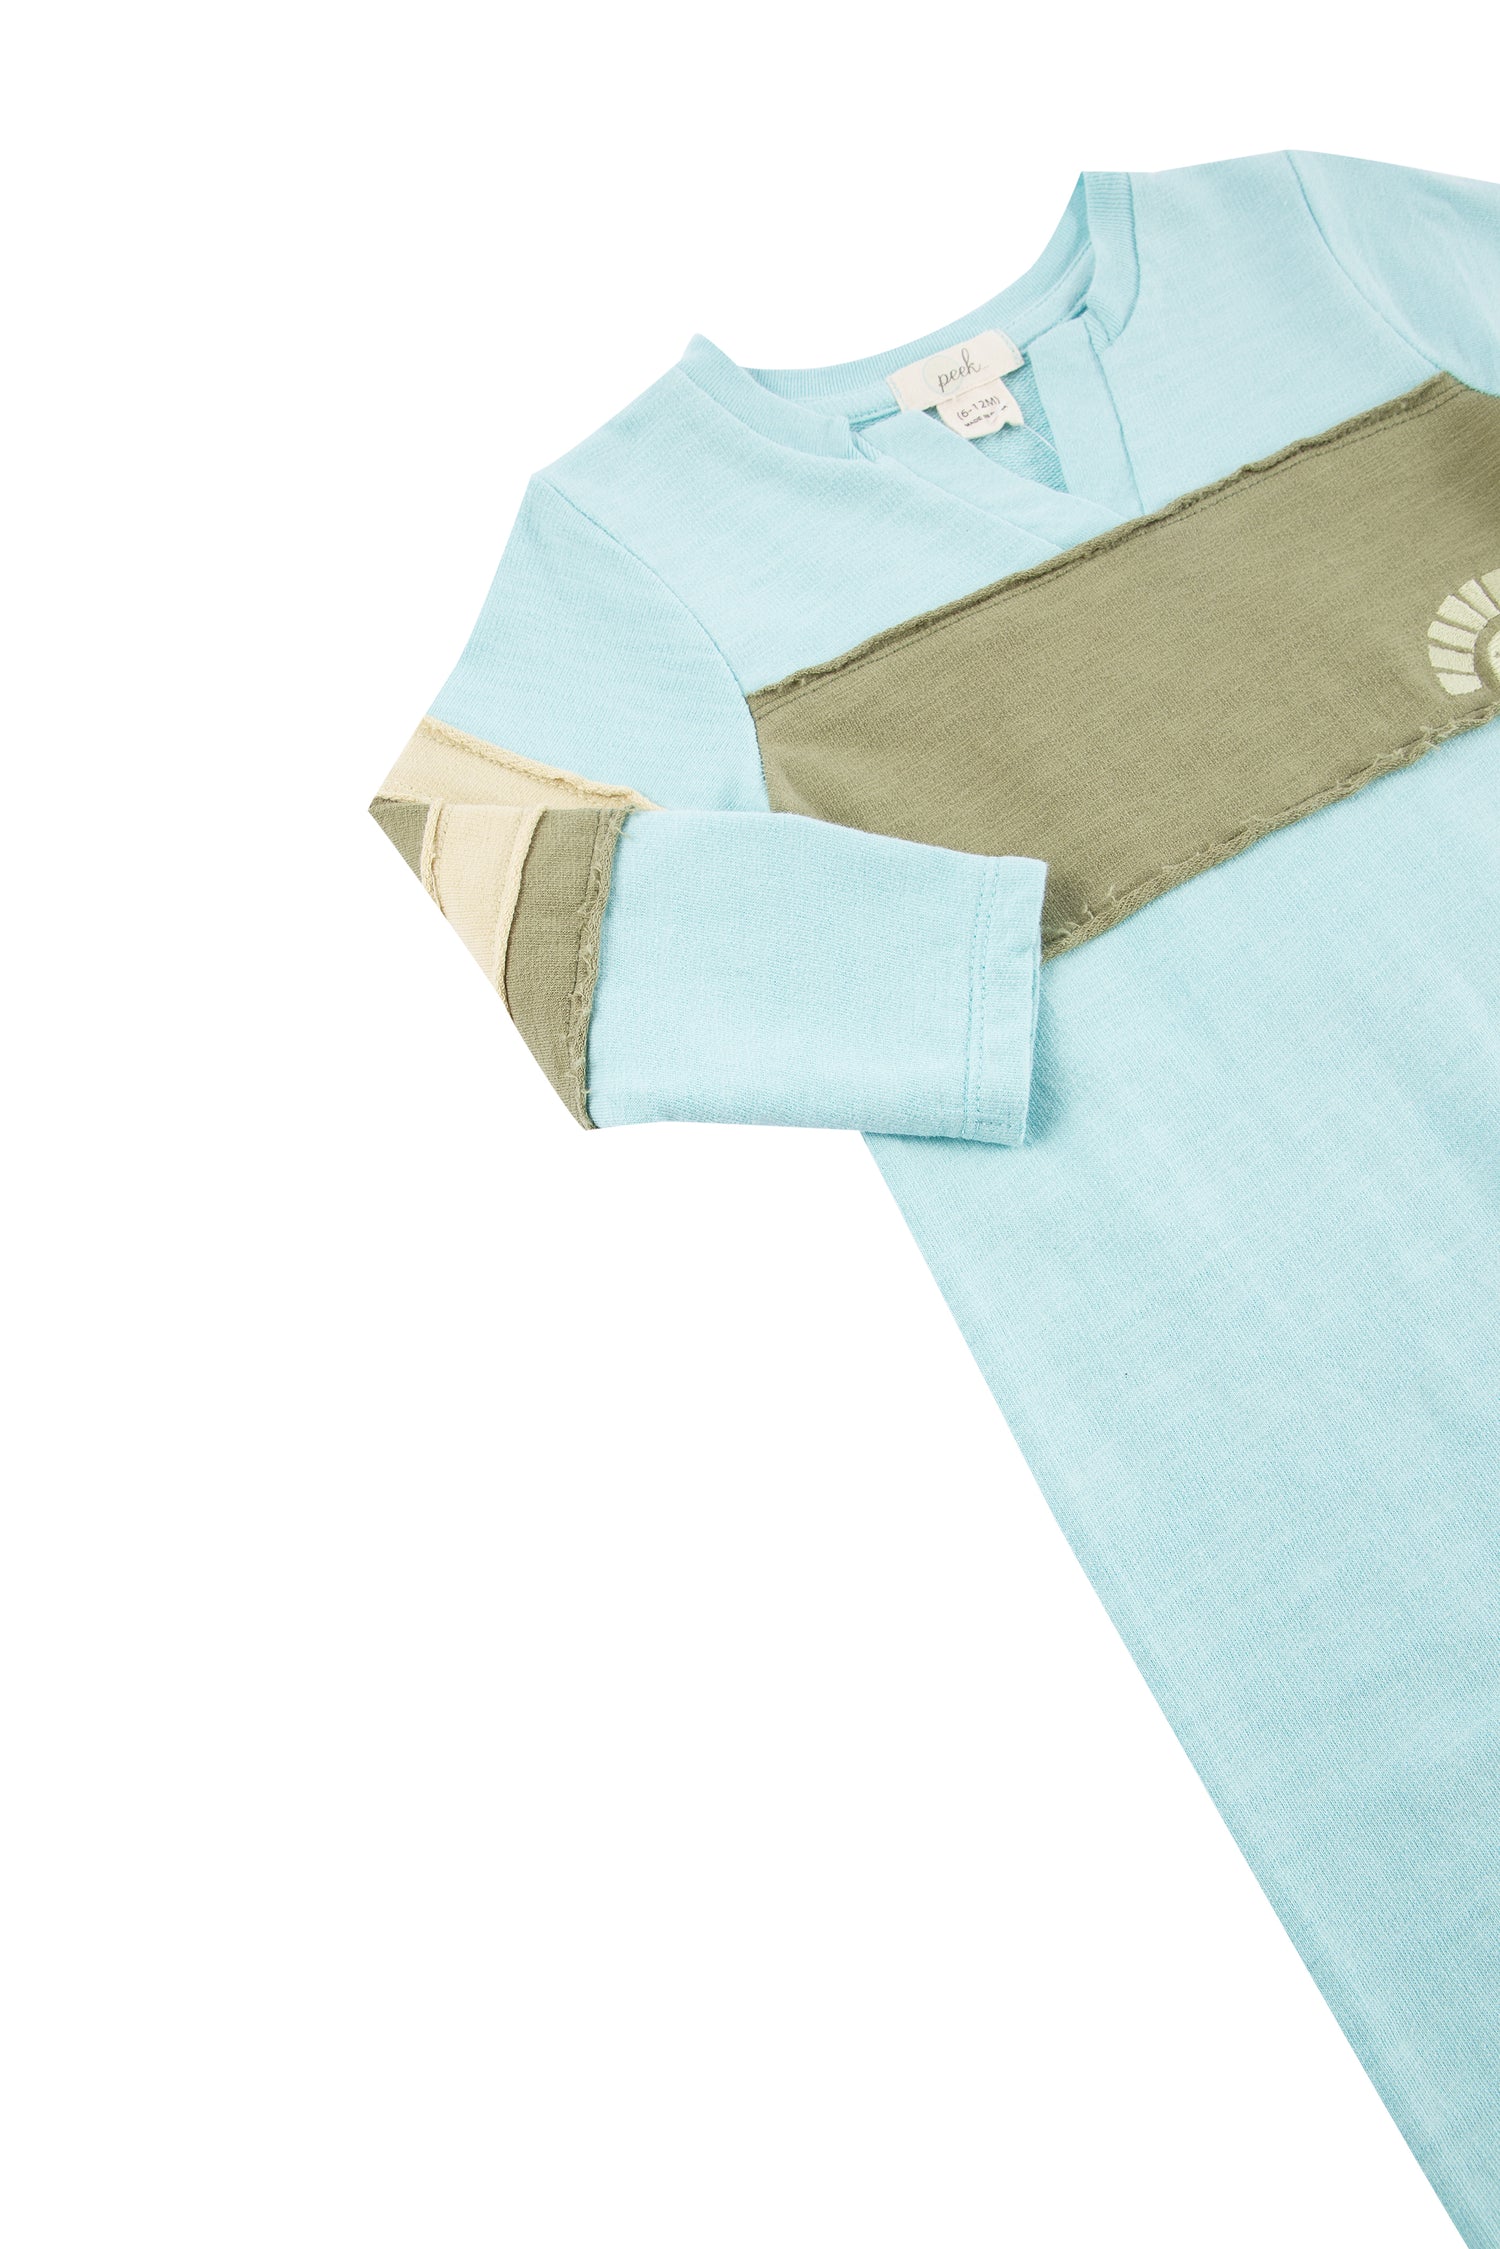 CLOSEUP OF KNIT LONG SLEEVE COVERALL WITH VERTICAL STRIPE DETAILING AND PEEK SUN MOTIF